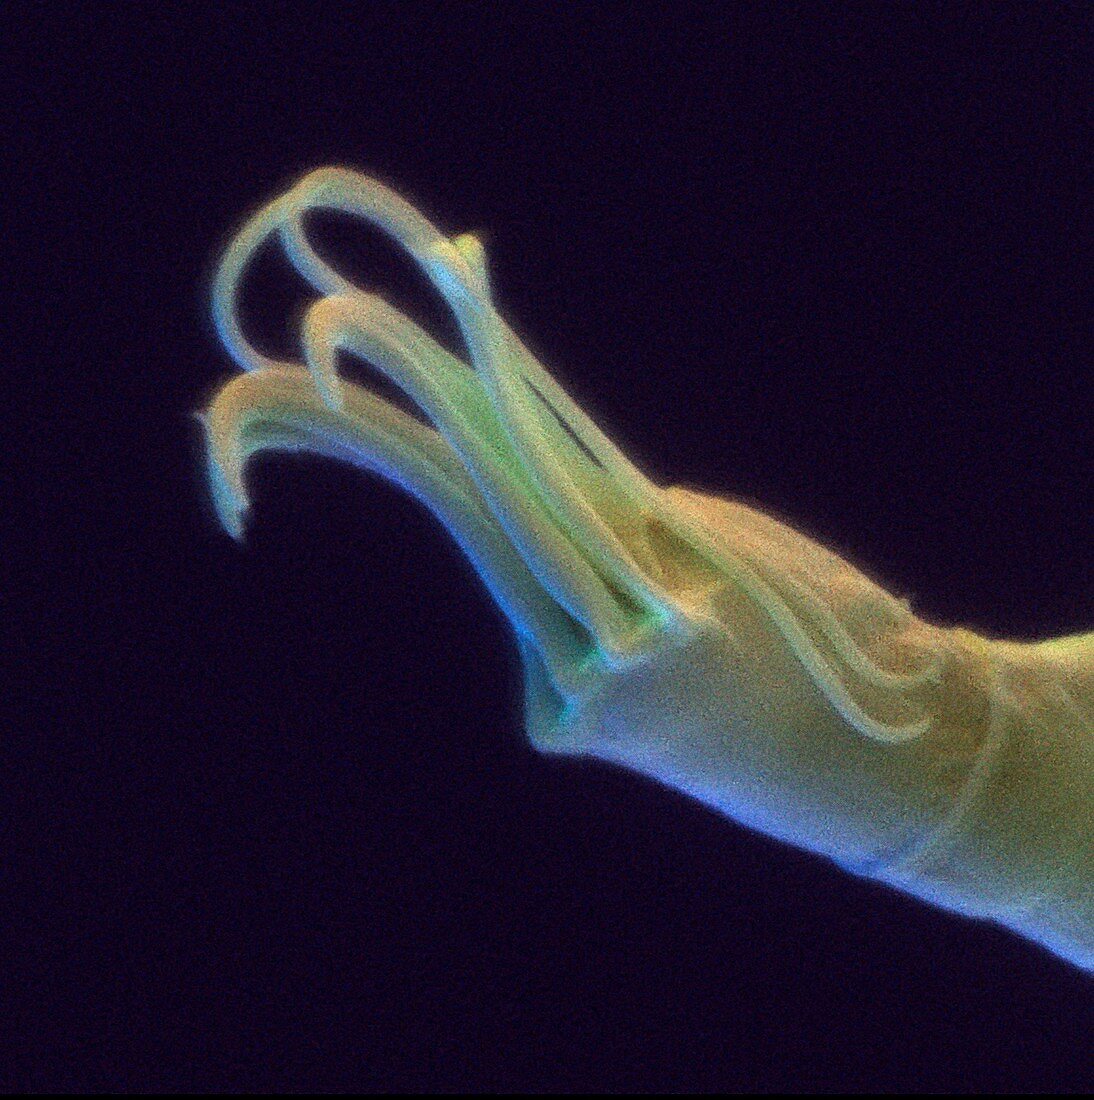 Coloured SEM of claws on the leg of a tardigrade